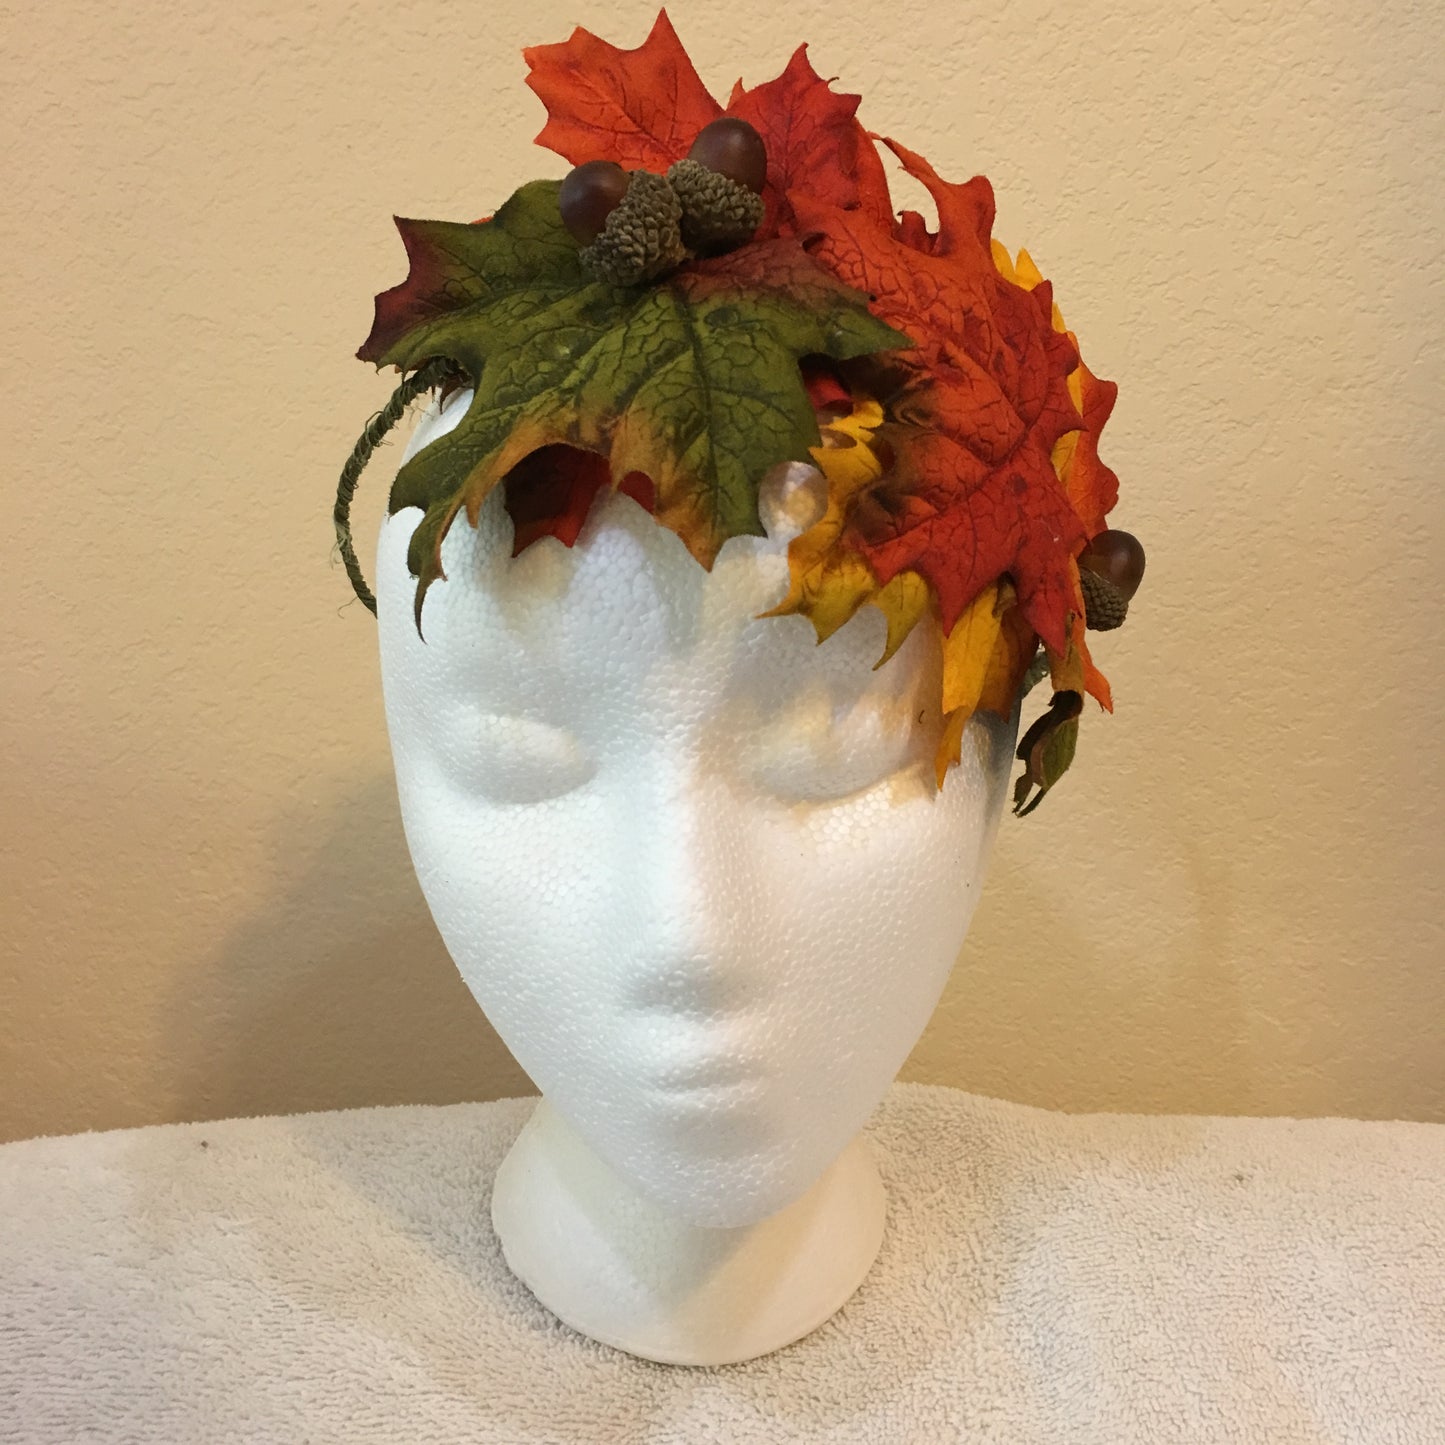 Side Wreath - Red, yellow & green fall leaves w/ acorns